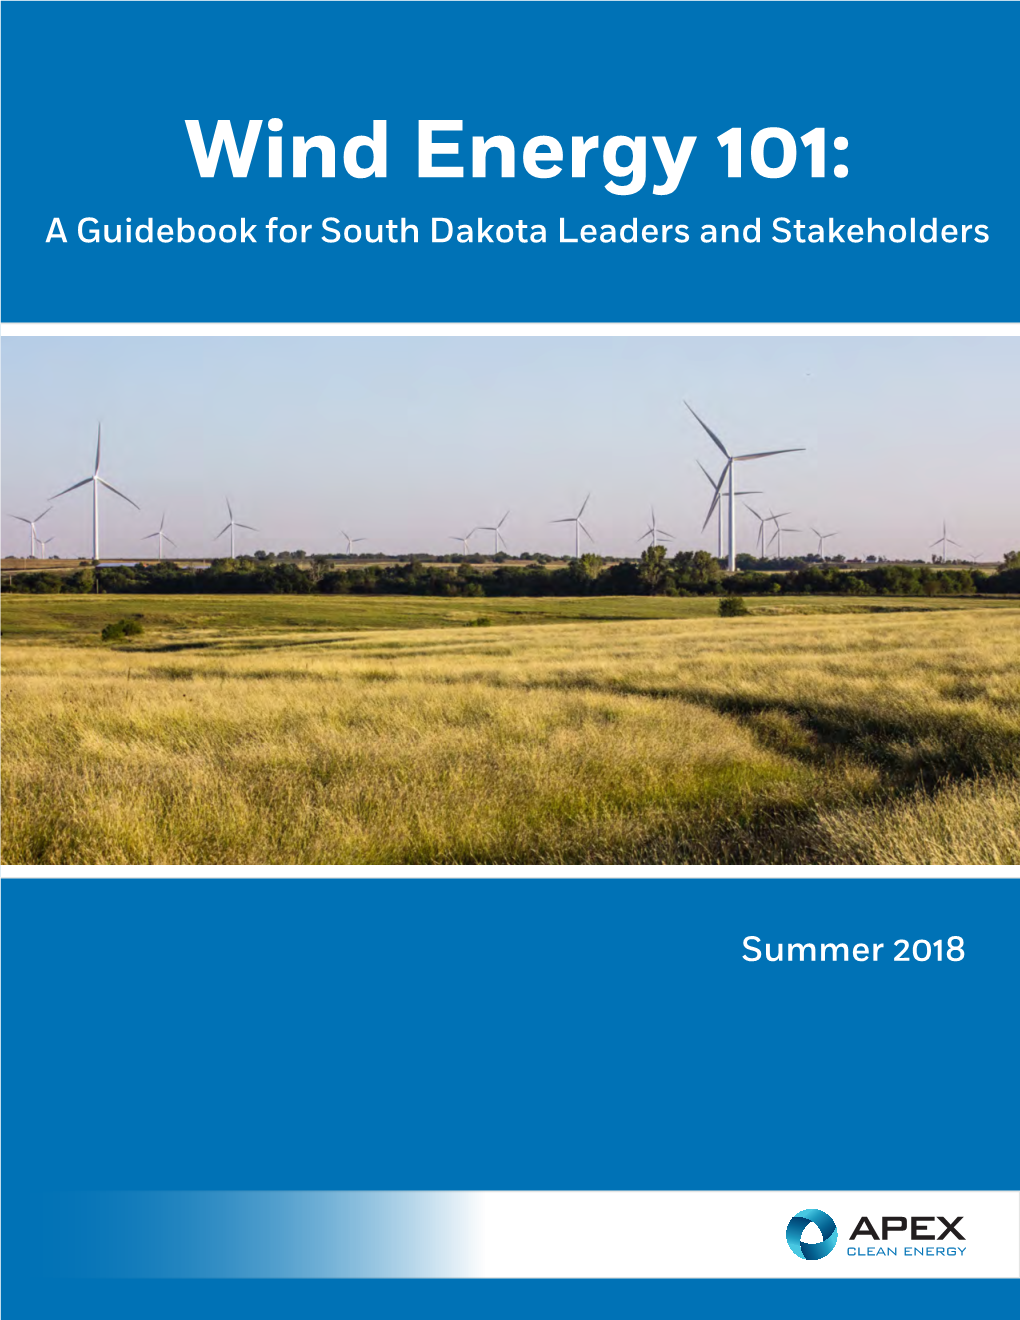 Wind Energy 101: a Guidebook for South Dakota Leaders and Stakeholders